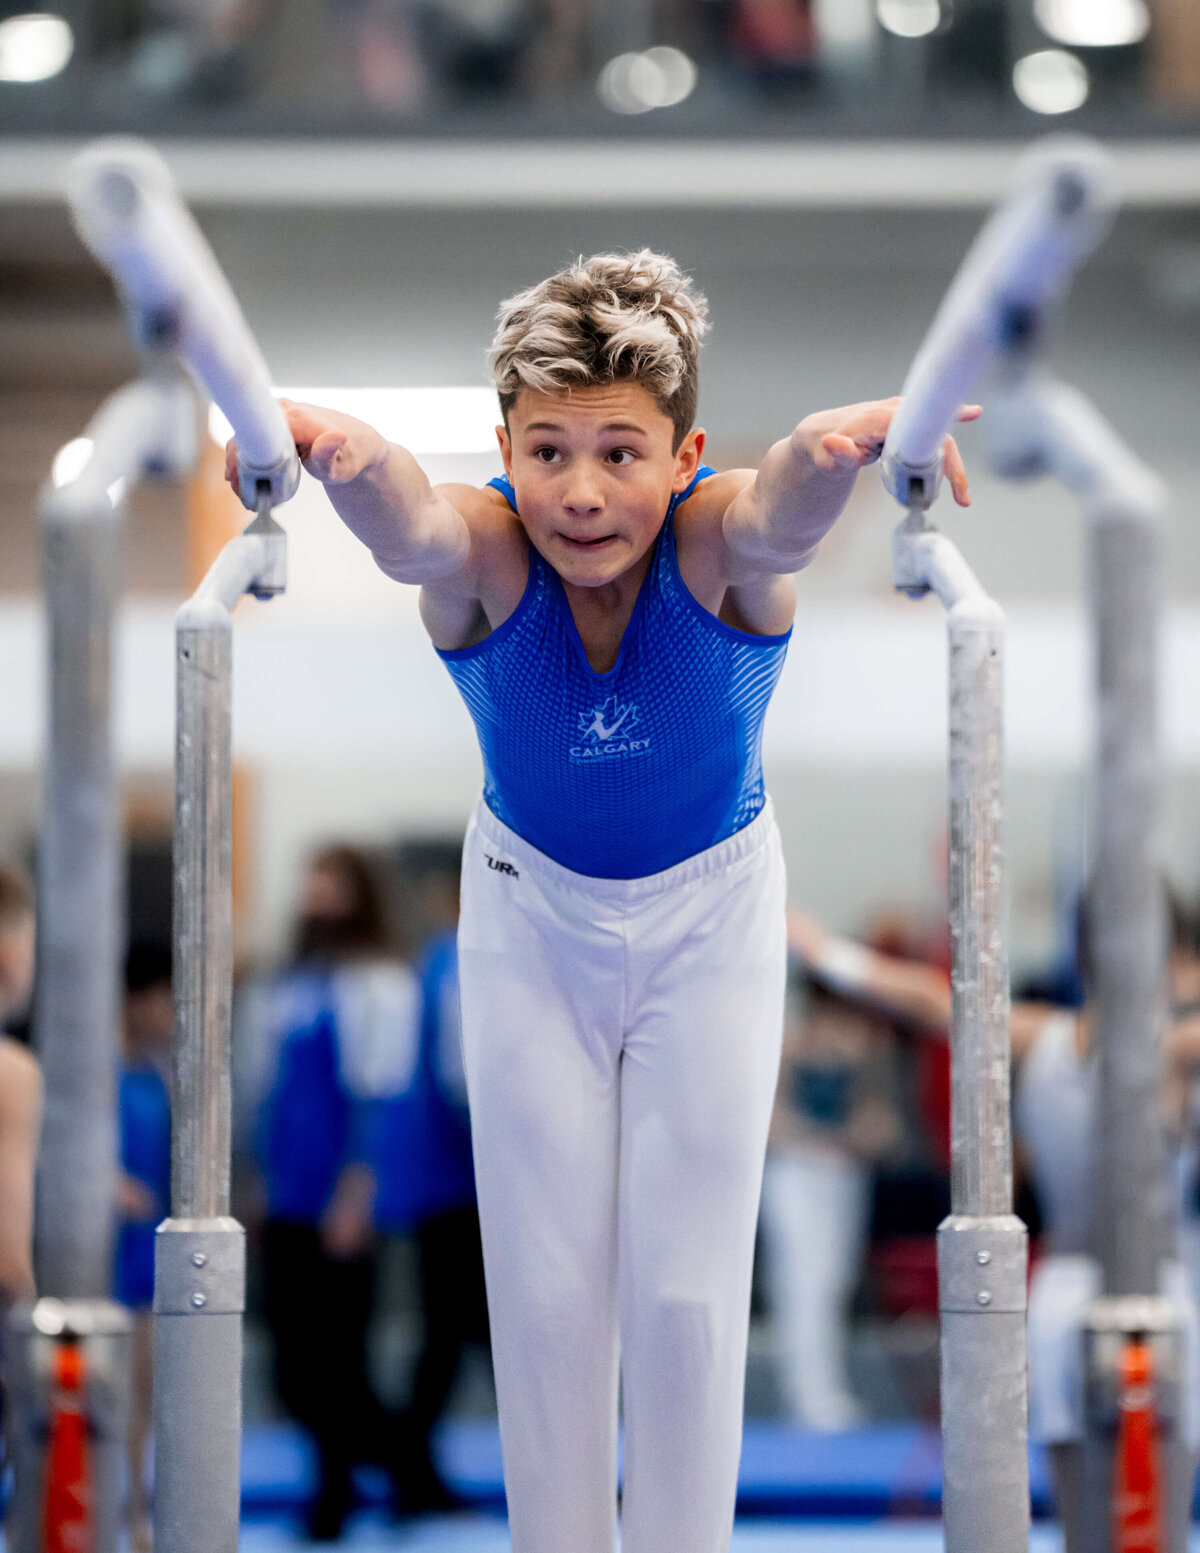 Photo by Luke O'Geil taken at the 2023 inaugural Grizzly Classic men's artistic gymnastics competitionA1_02110